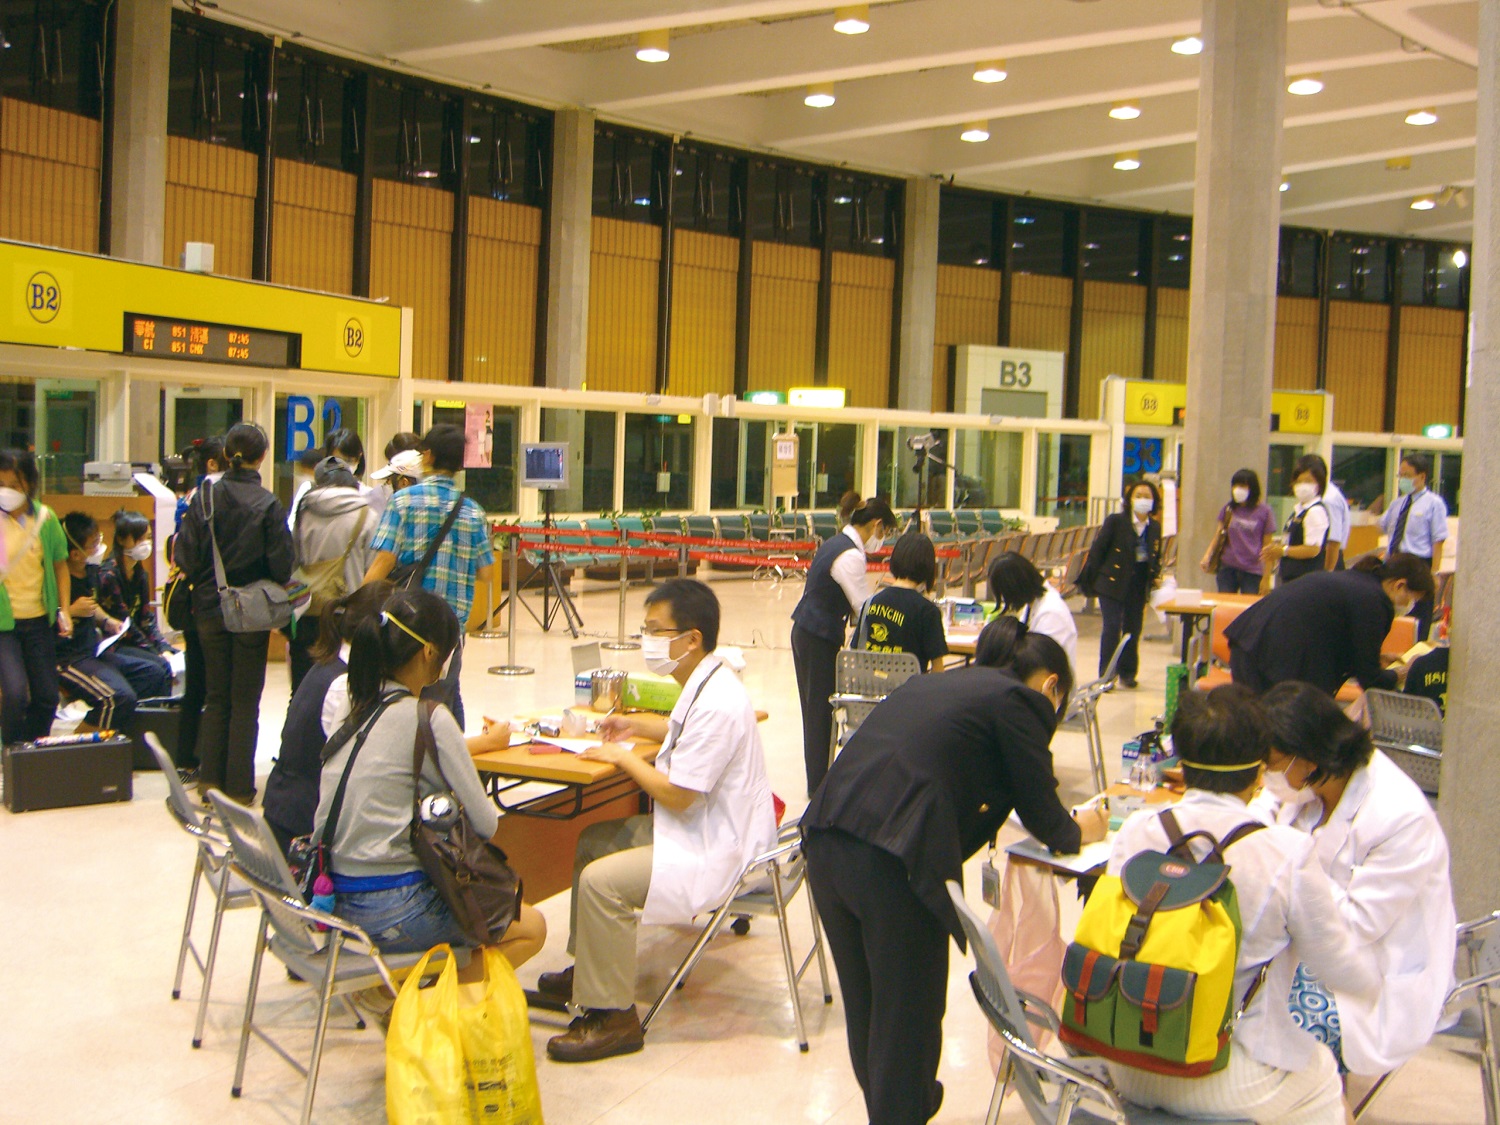 Quarantine personnel conduct fever screening and health assessments at the airport.